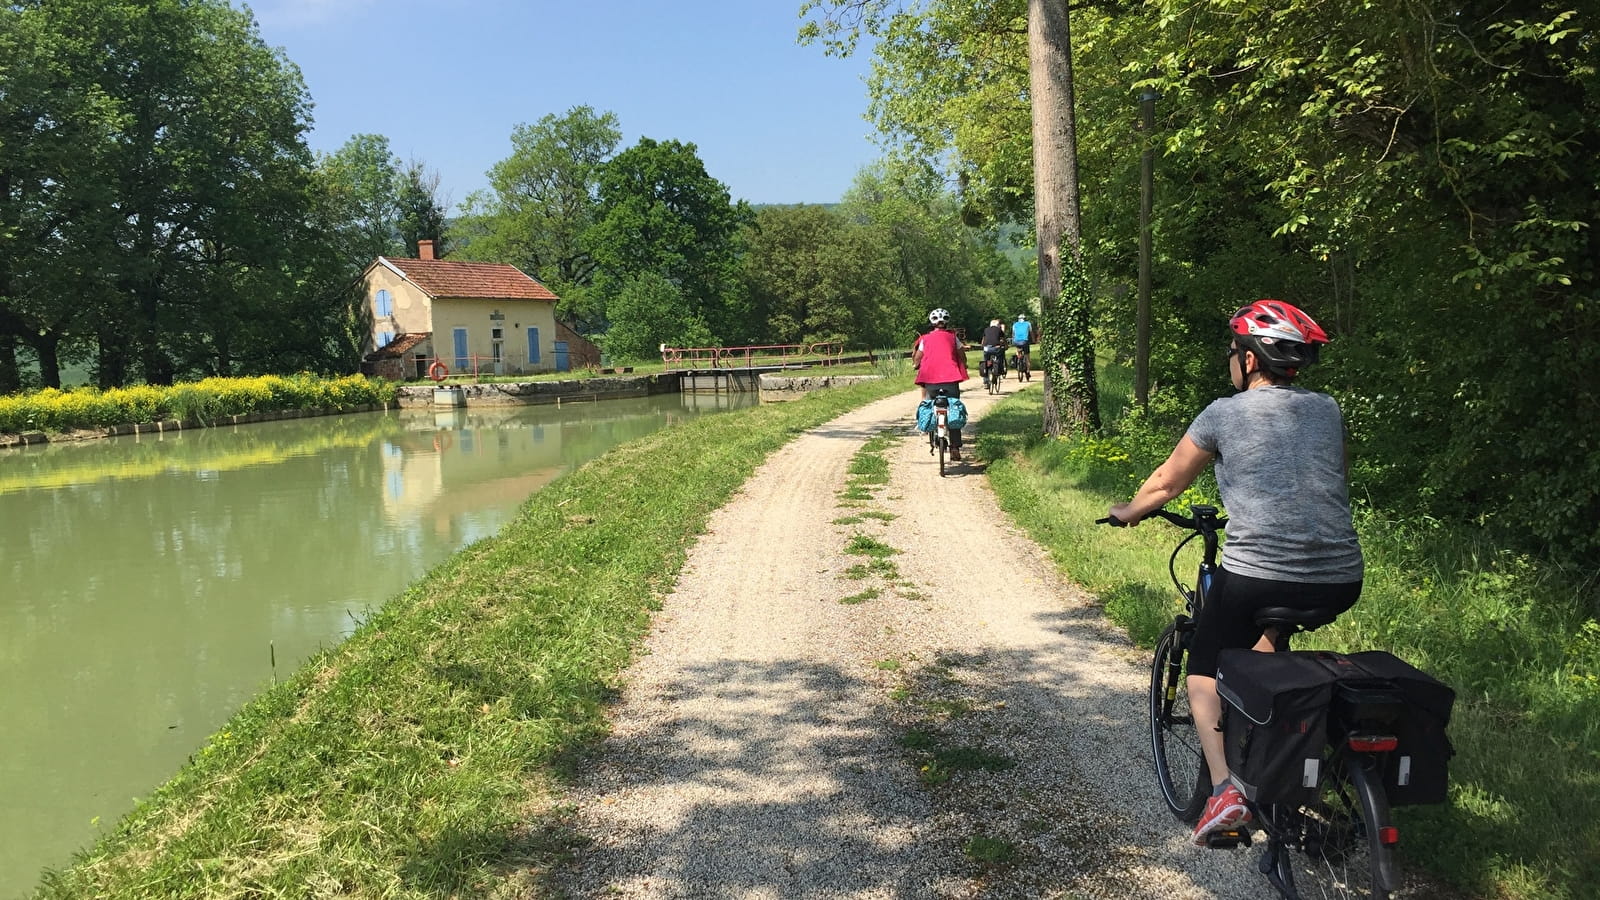 Guided day trip by bike - Along the Burgundy canal